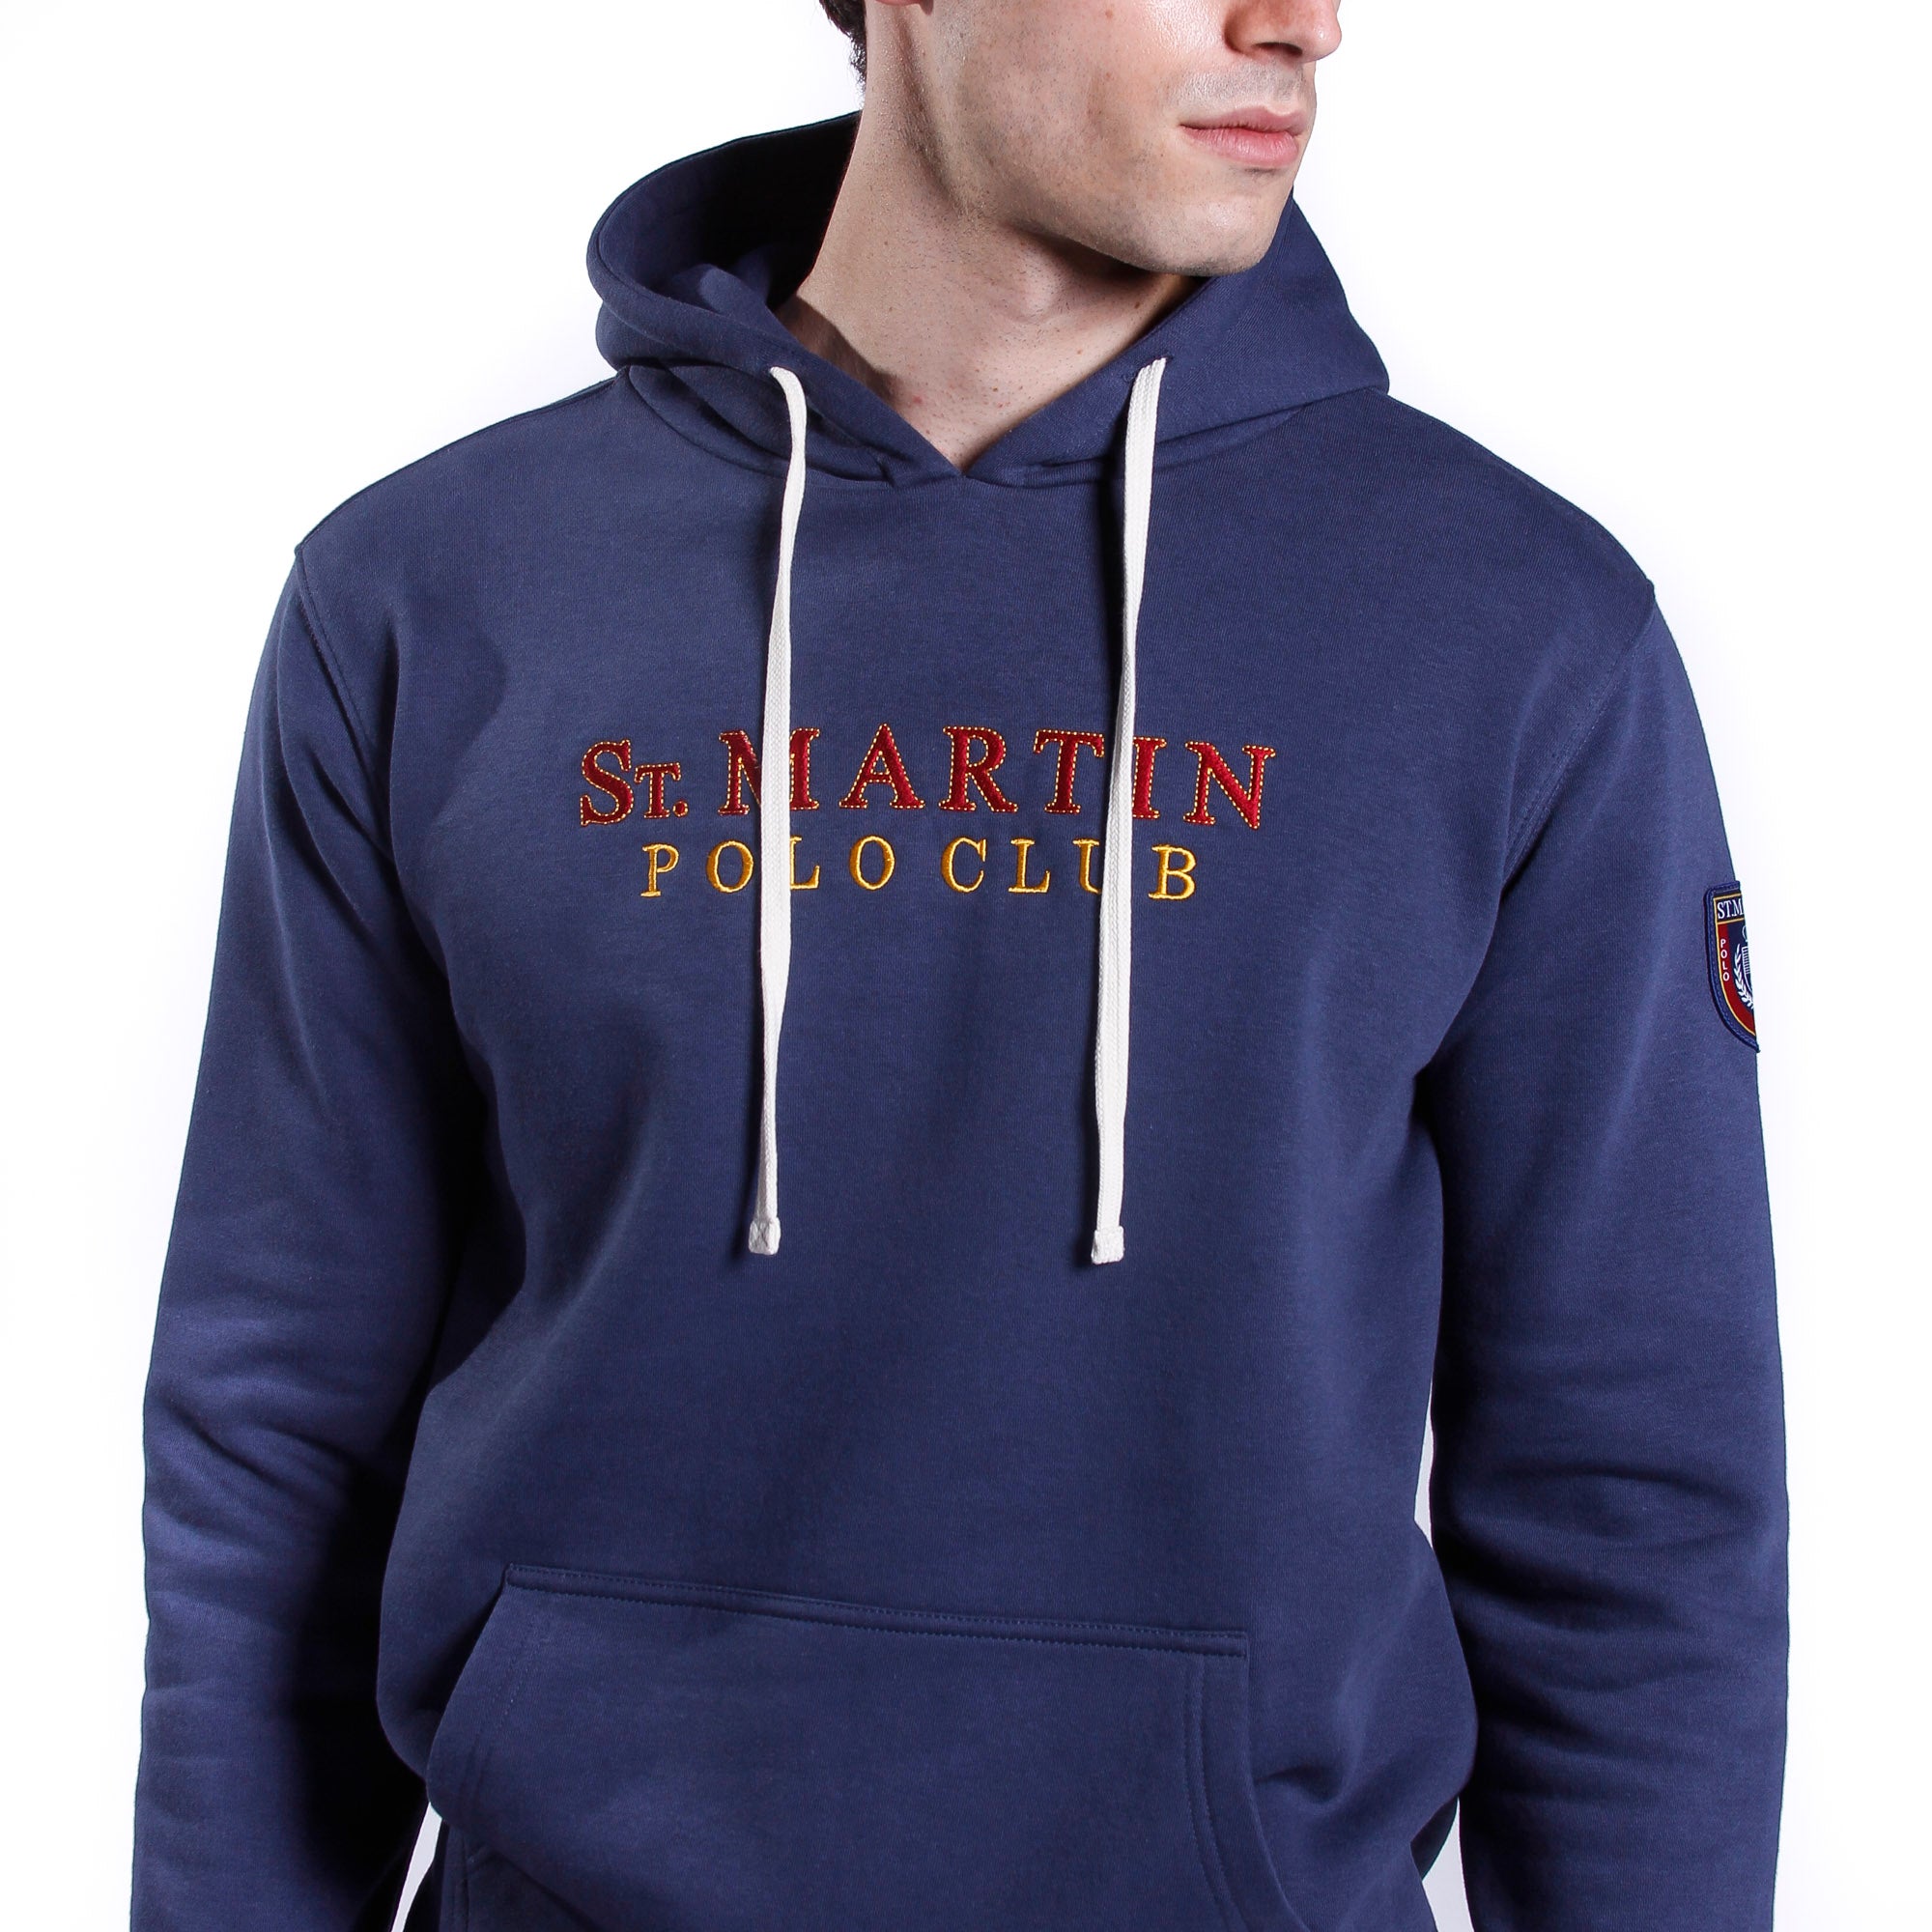 Sweatshirt with hood and inside brushed embroidered logo